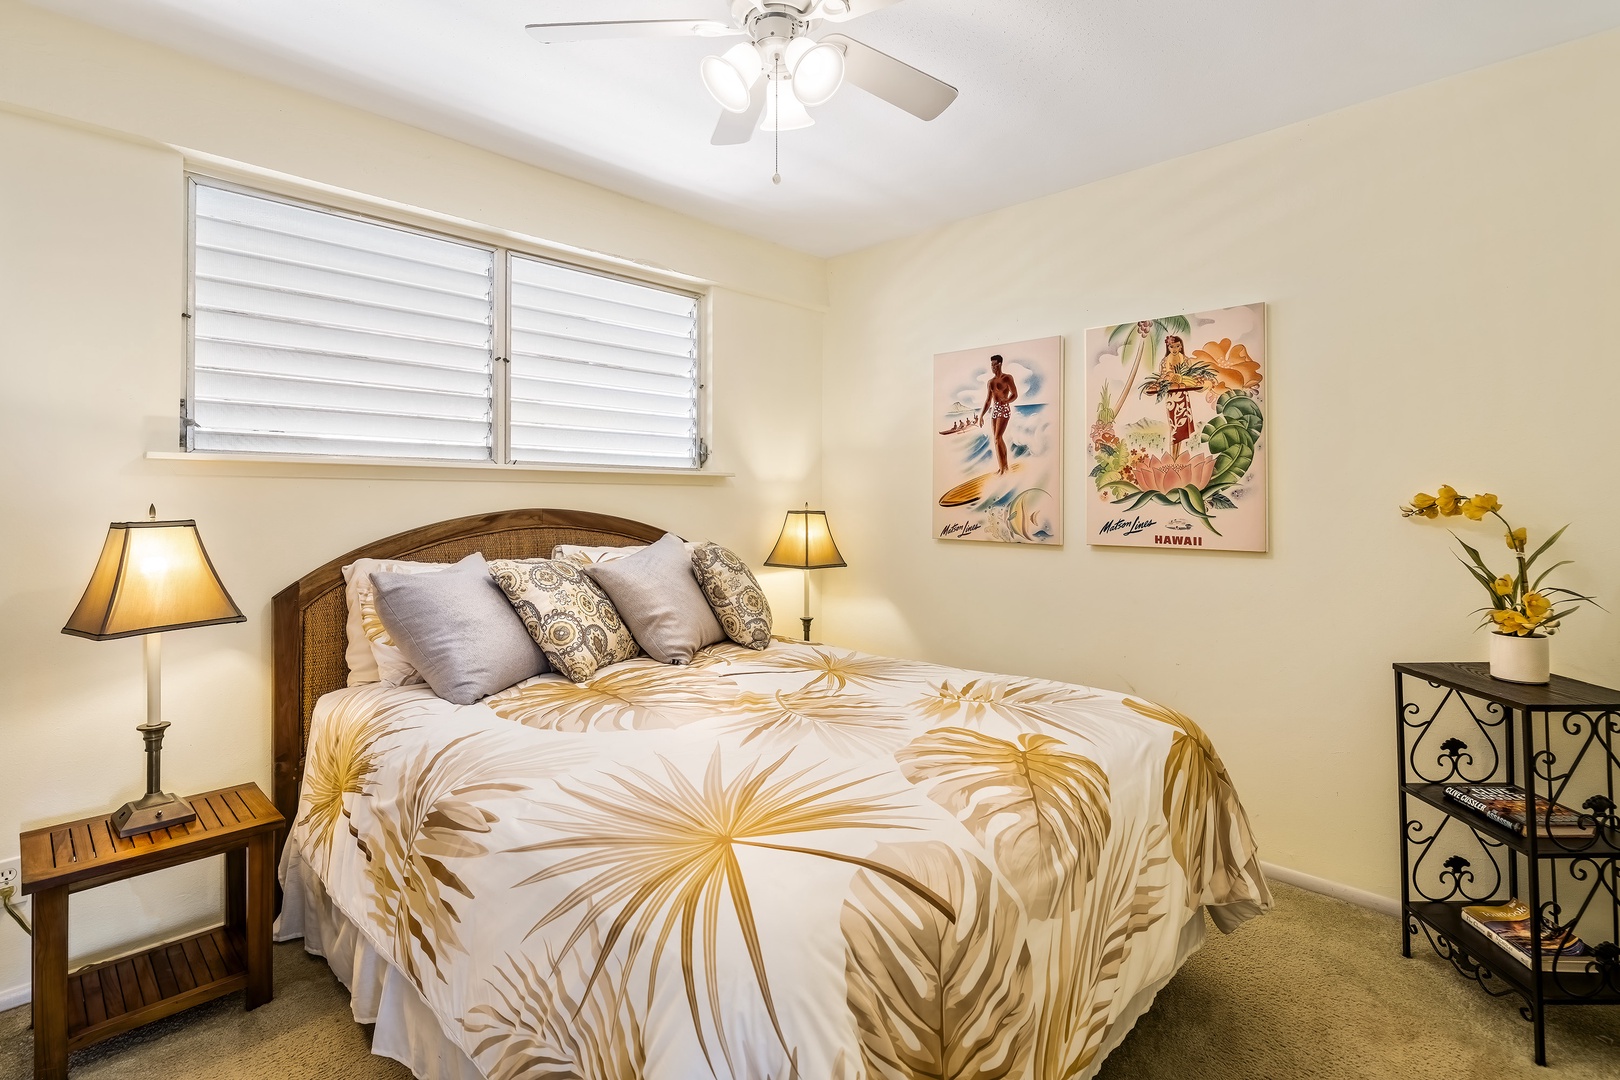 Kailua-Kona Vacation Rentals, Kona Mansions D231 - Guest bedroom equipped with Queen bed